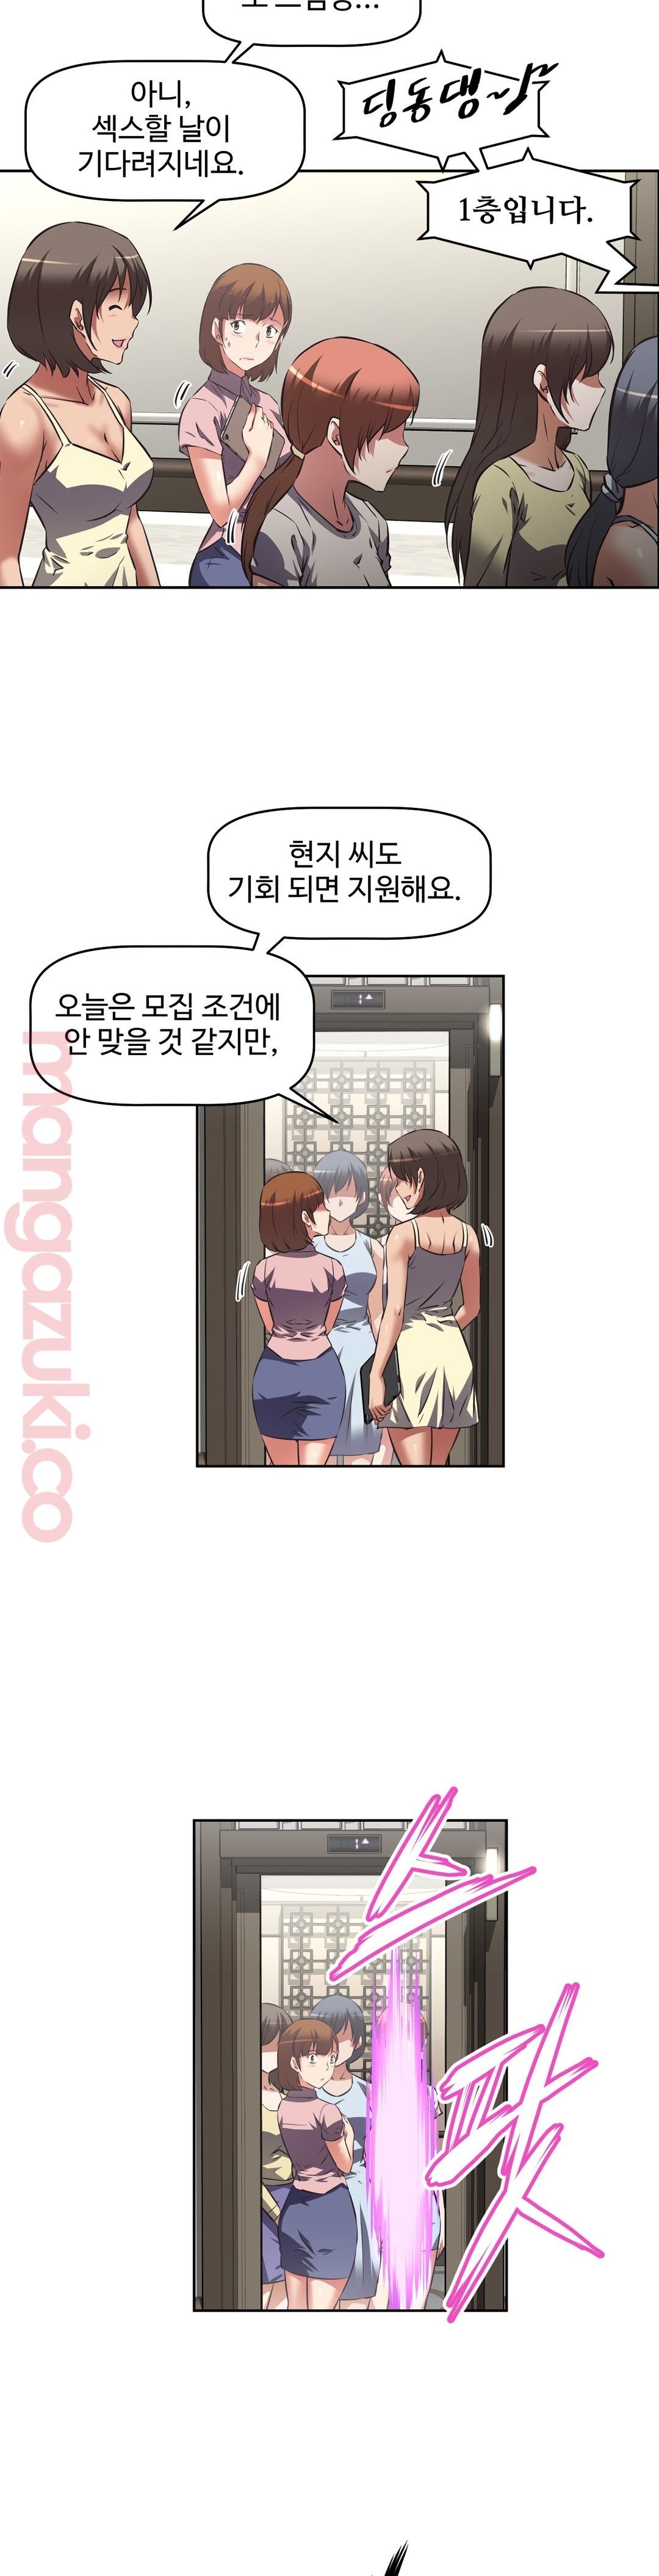 The Girls’ Nest Raw - Chapter 36 Page 5